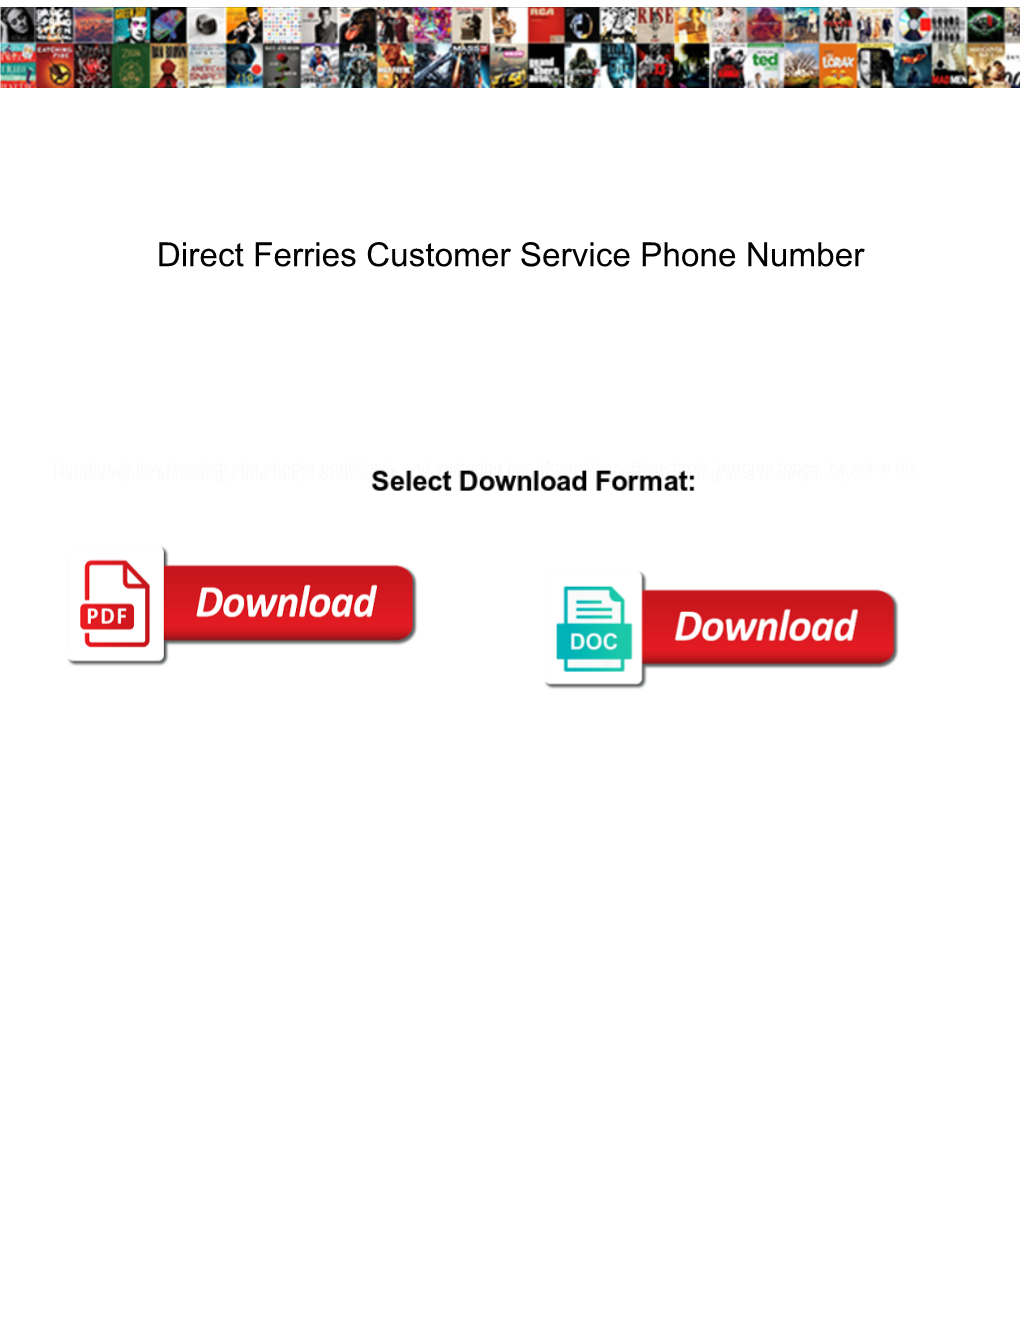 Direct Ferries Customer Service Phone Number